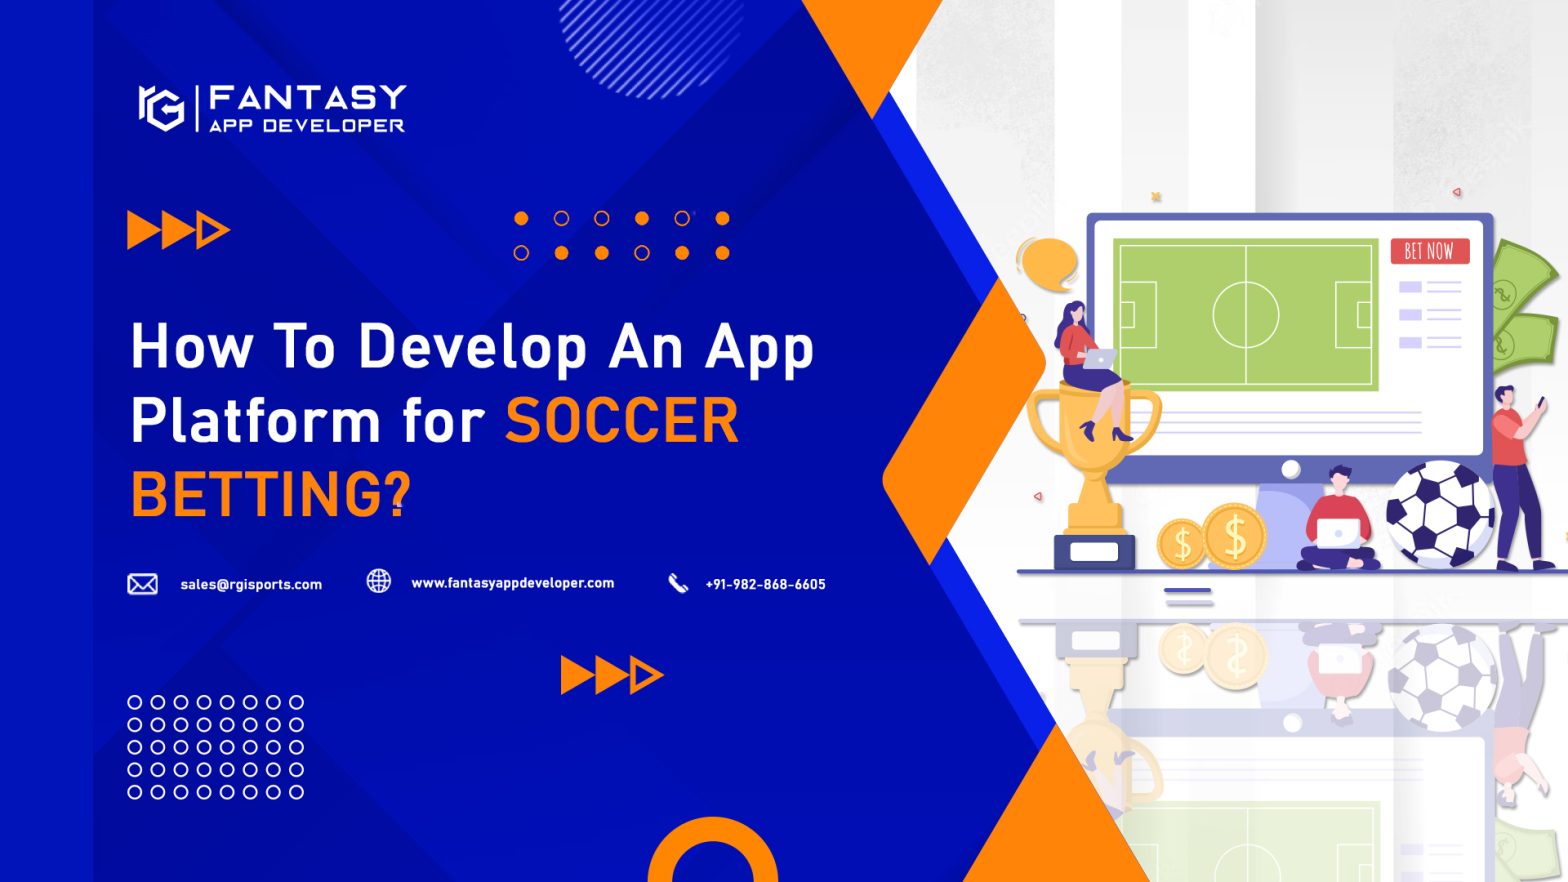 How To Develop An App Platform for Soccer Betting App